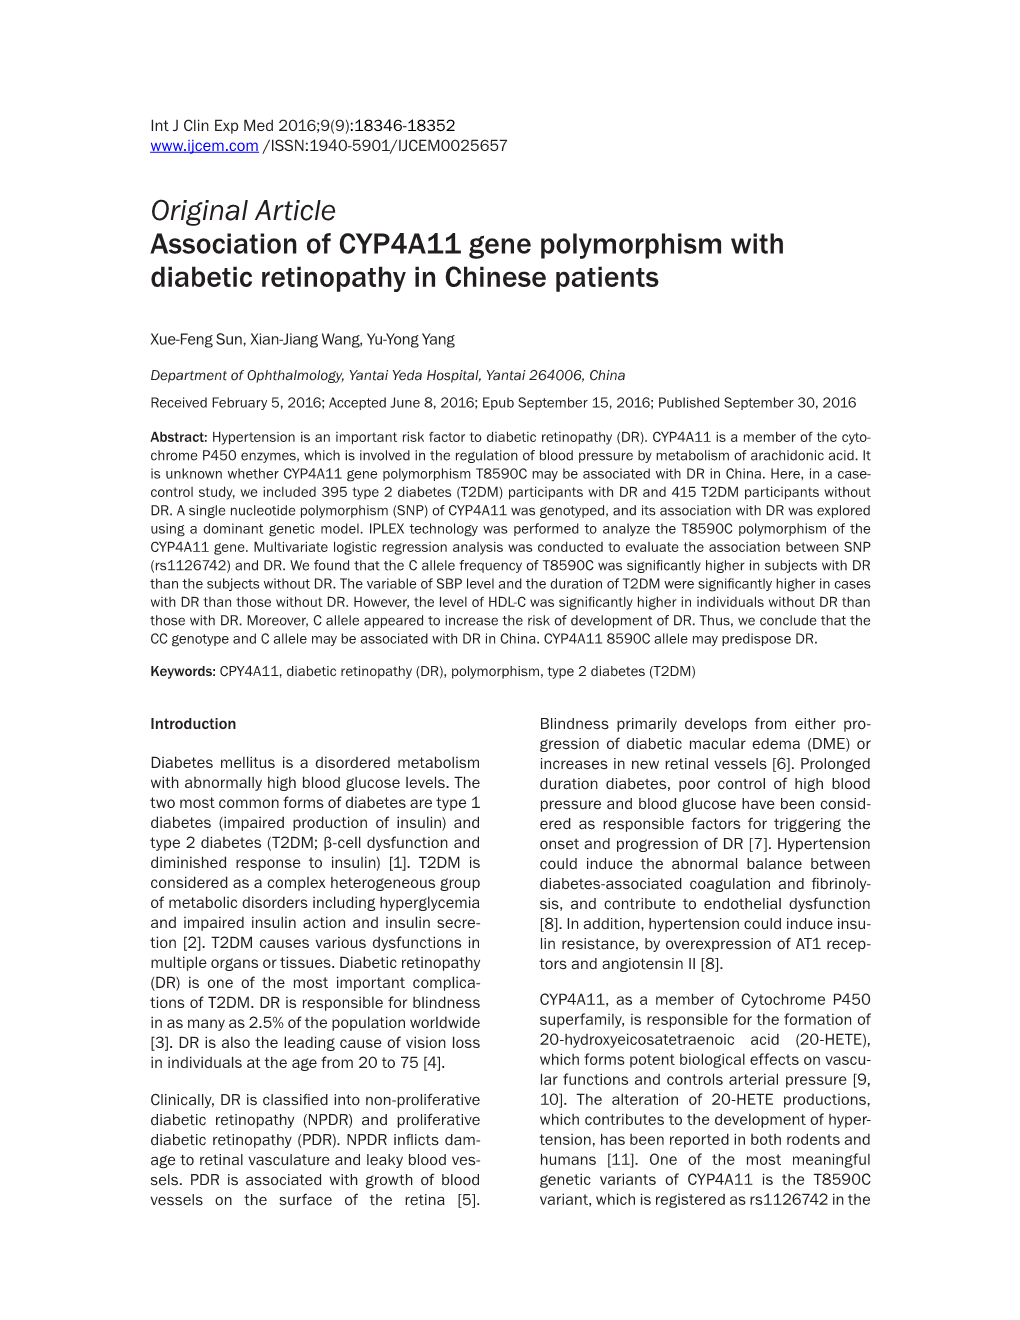 Original Article Association of CYP4A11 Gene Polymorphism with Diabetic Retinopathy in Chinese Patients